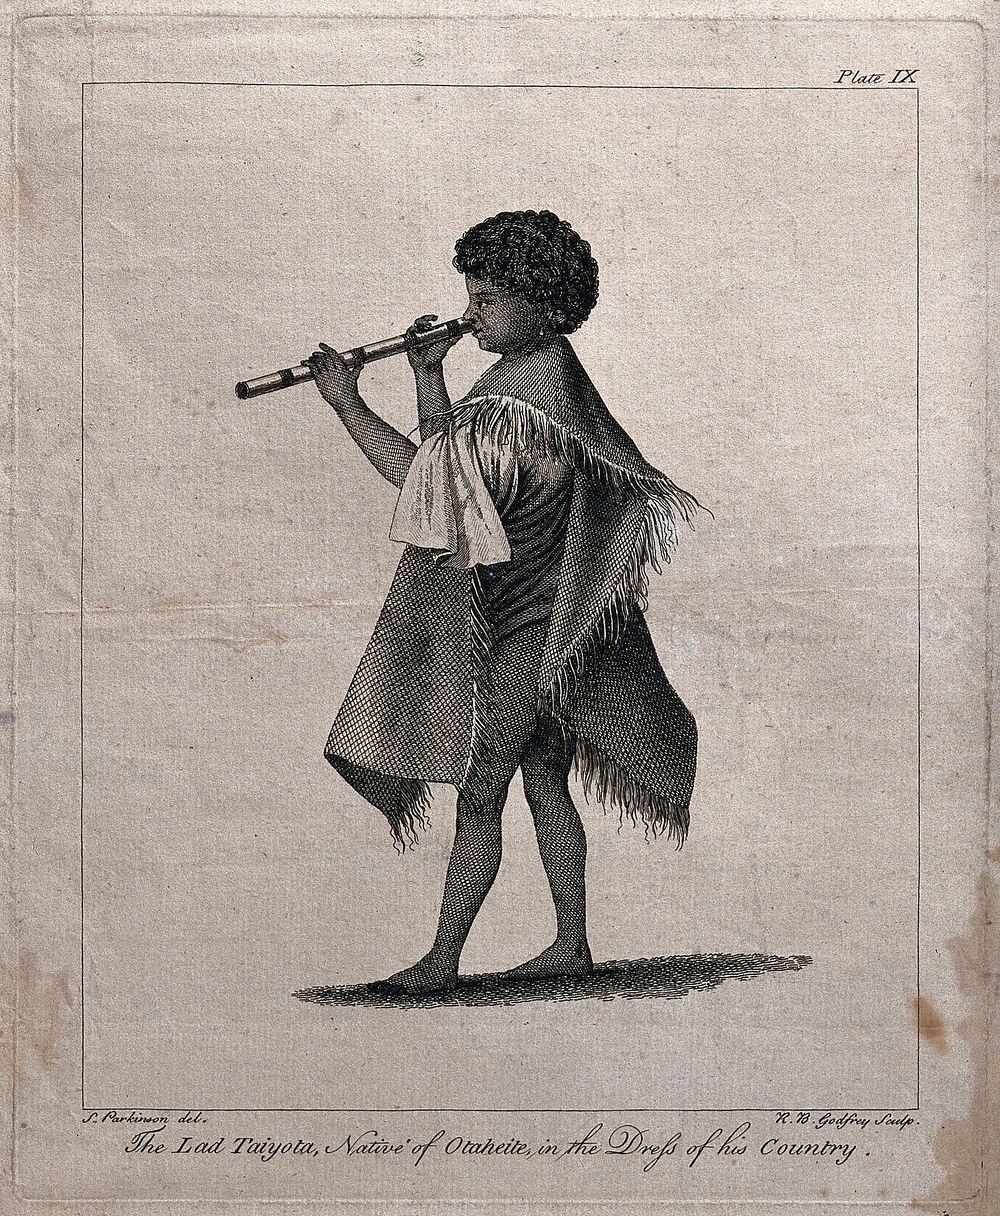 Taiyota, a boy from Otaheite (Tahiti), playing the nose-flute. Etching by R.B. Godfrey, 1773, after S. Parkinson.